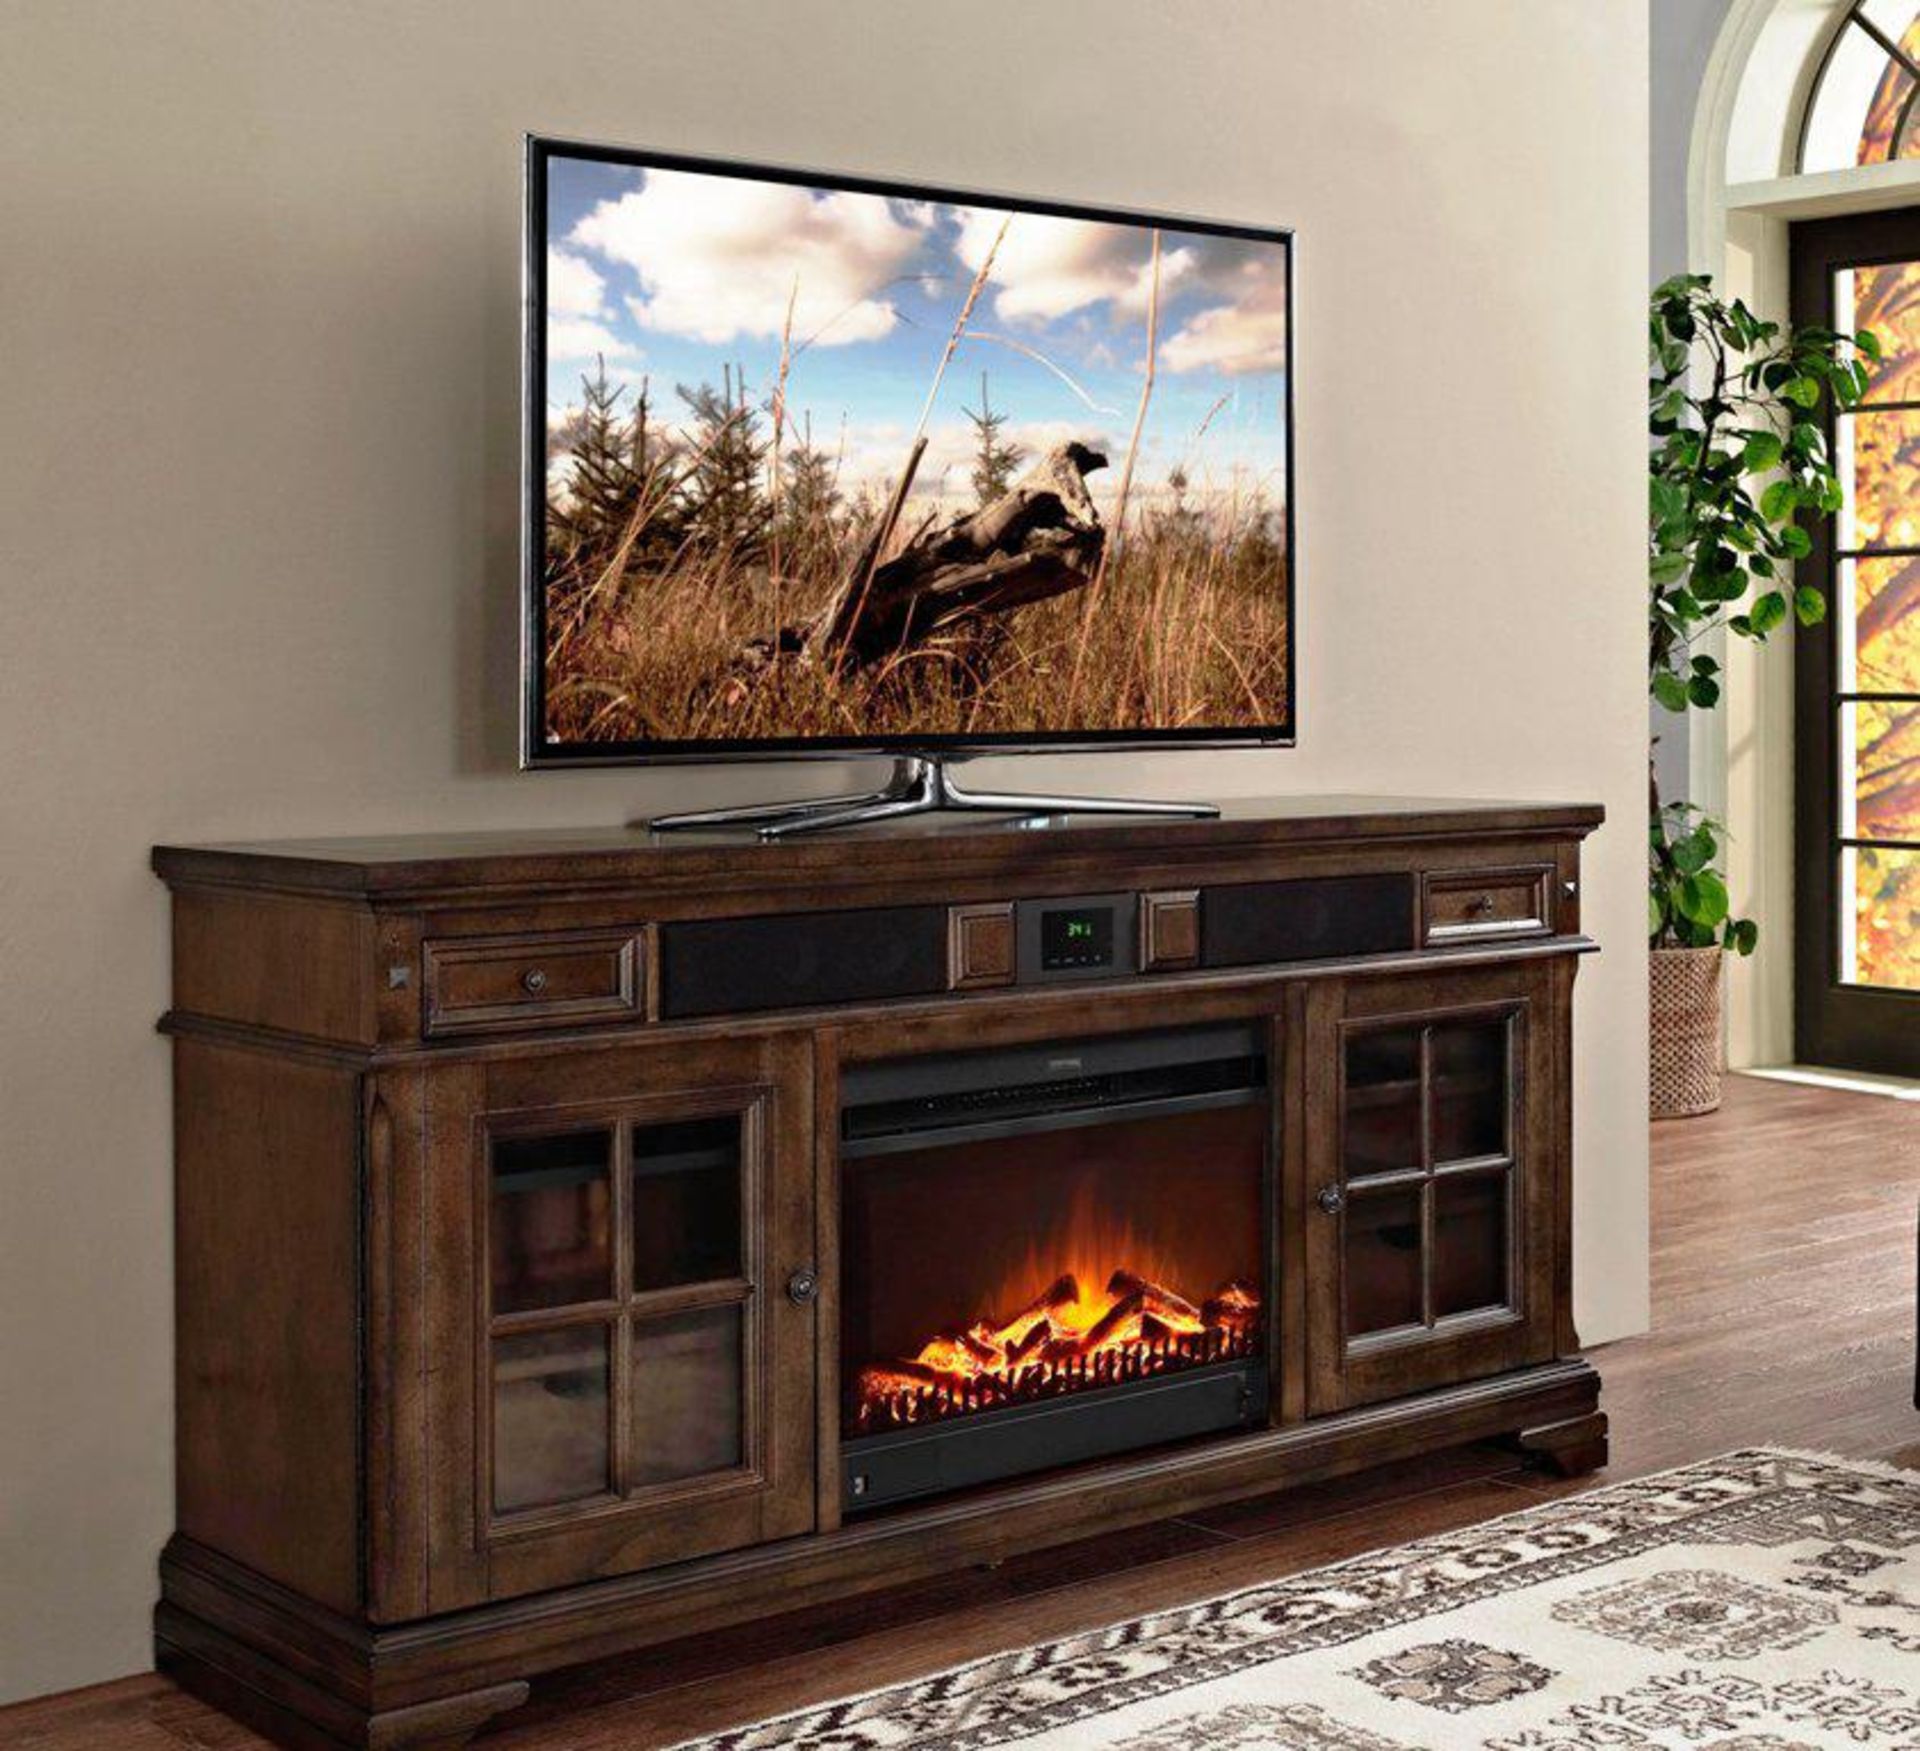 1 BRAND NEW BOXED TRESANTI 74" TV CONSOLE WITH ELECTRIC FIREPLACE RRP £499